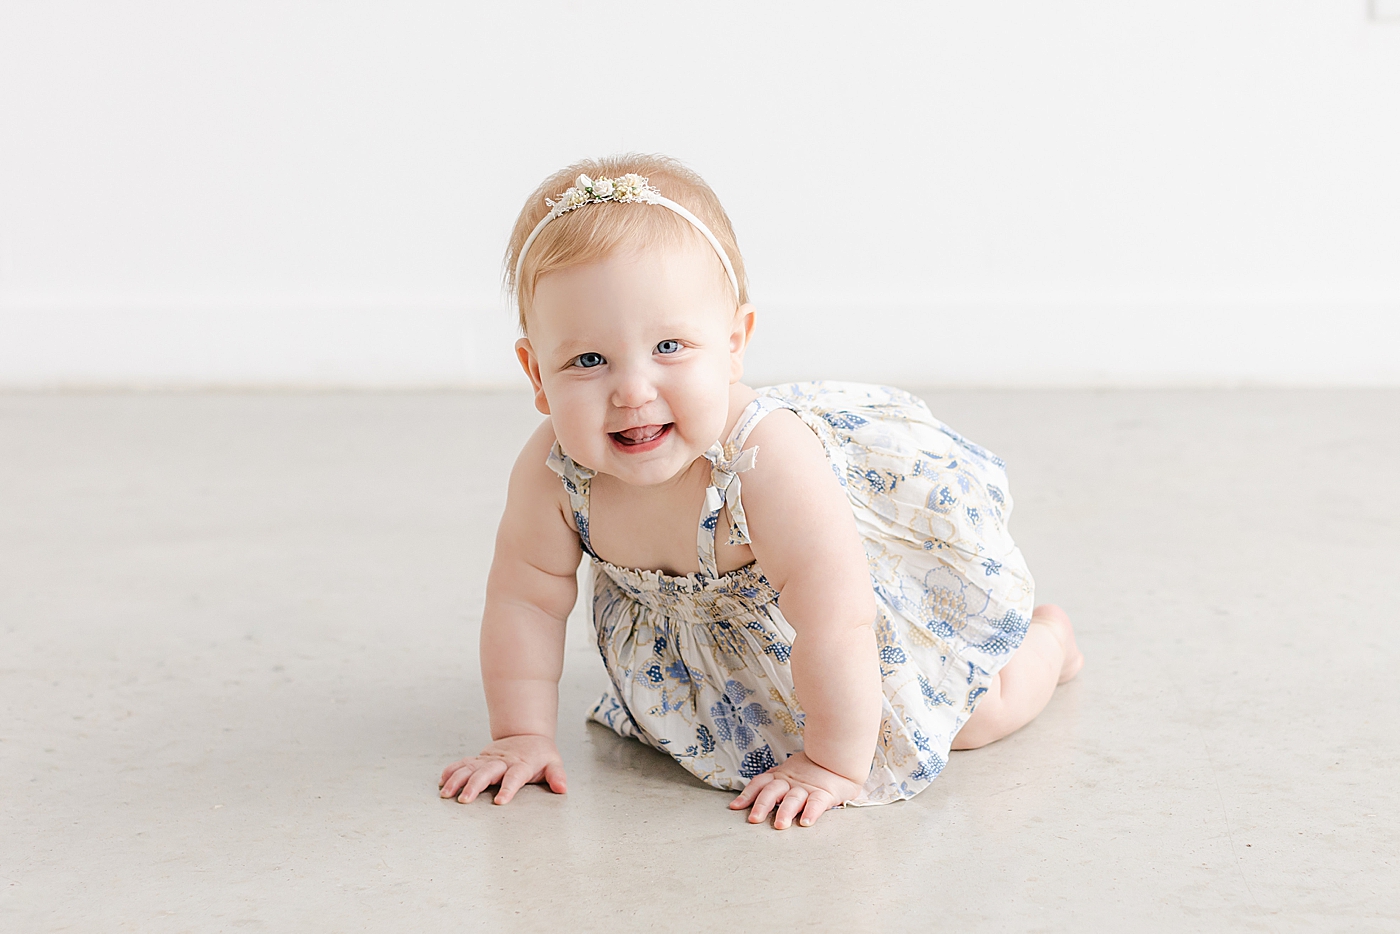 Baby girl in a dress and headband smiling | Sana Ahmed Photography